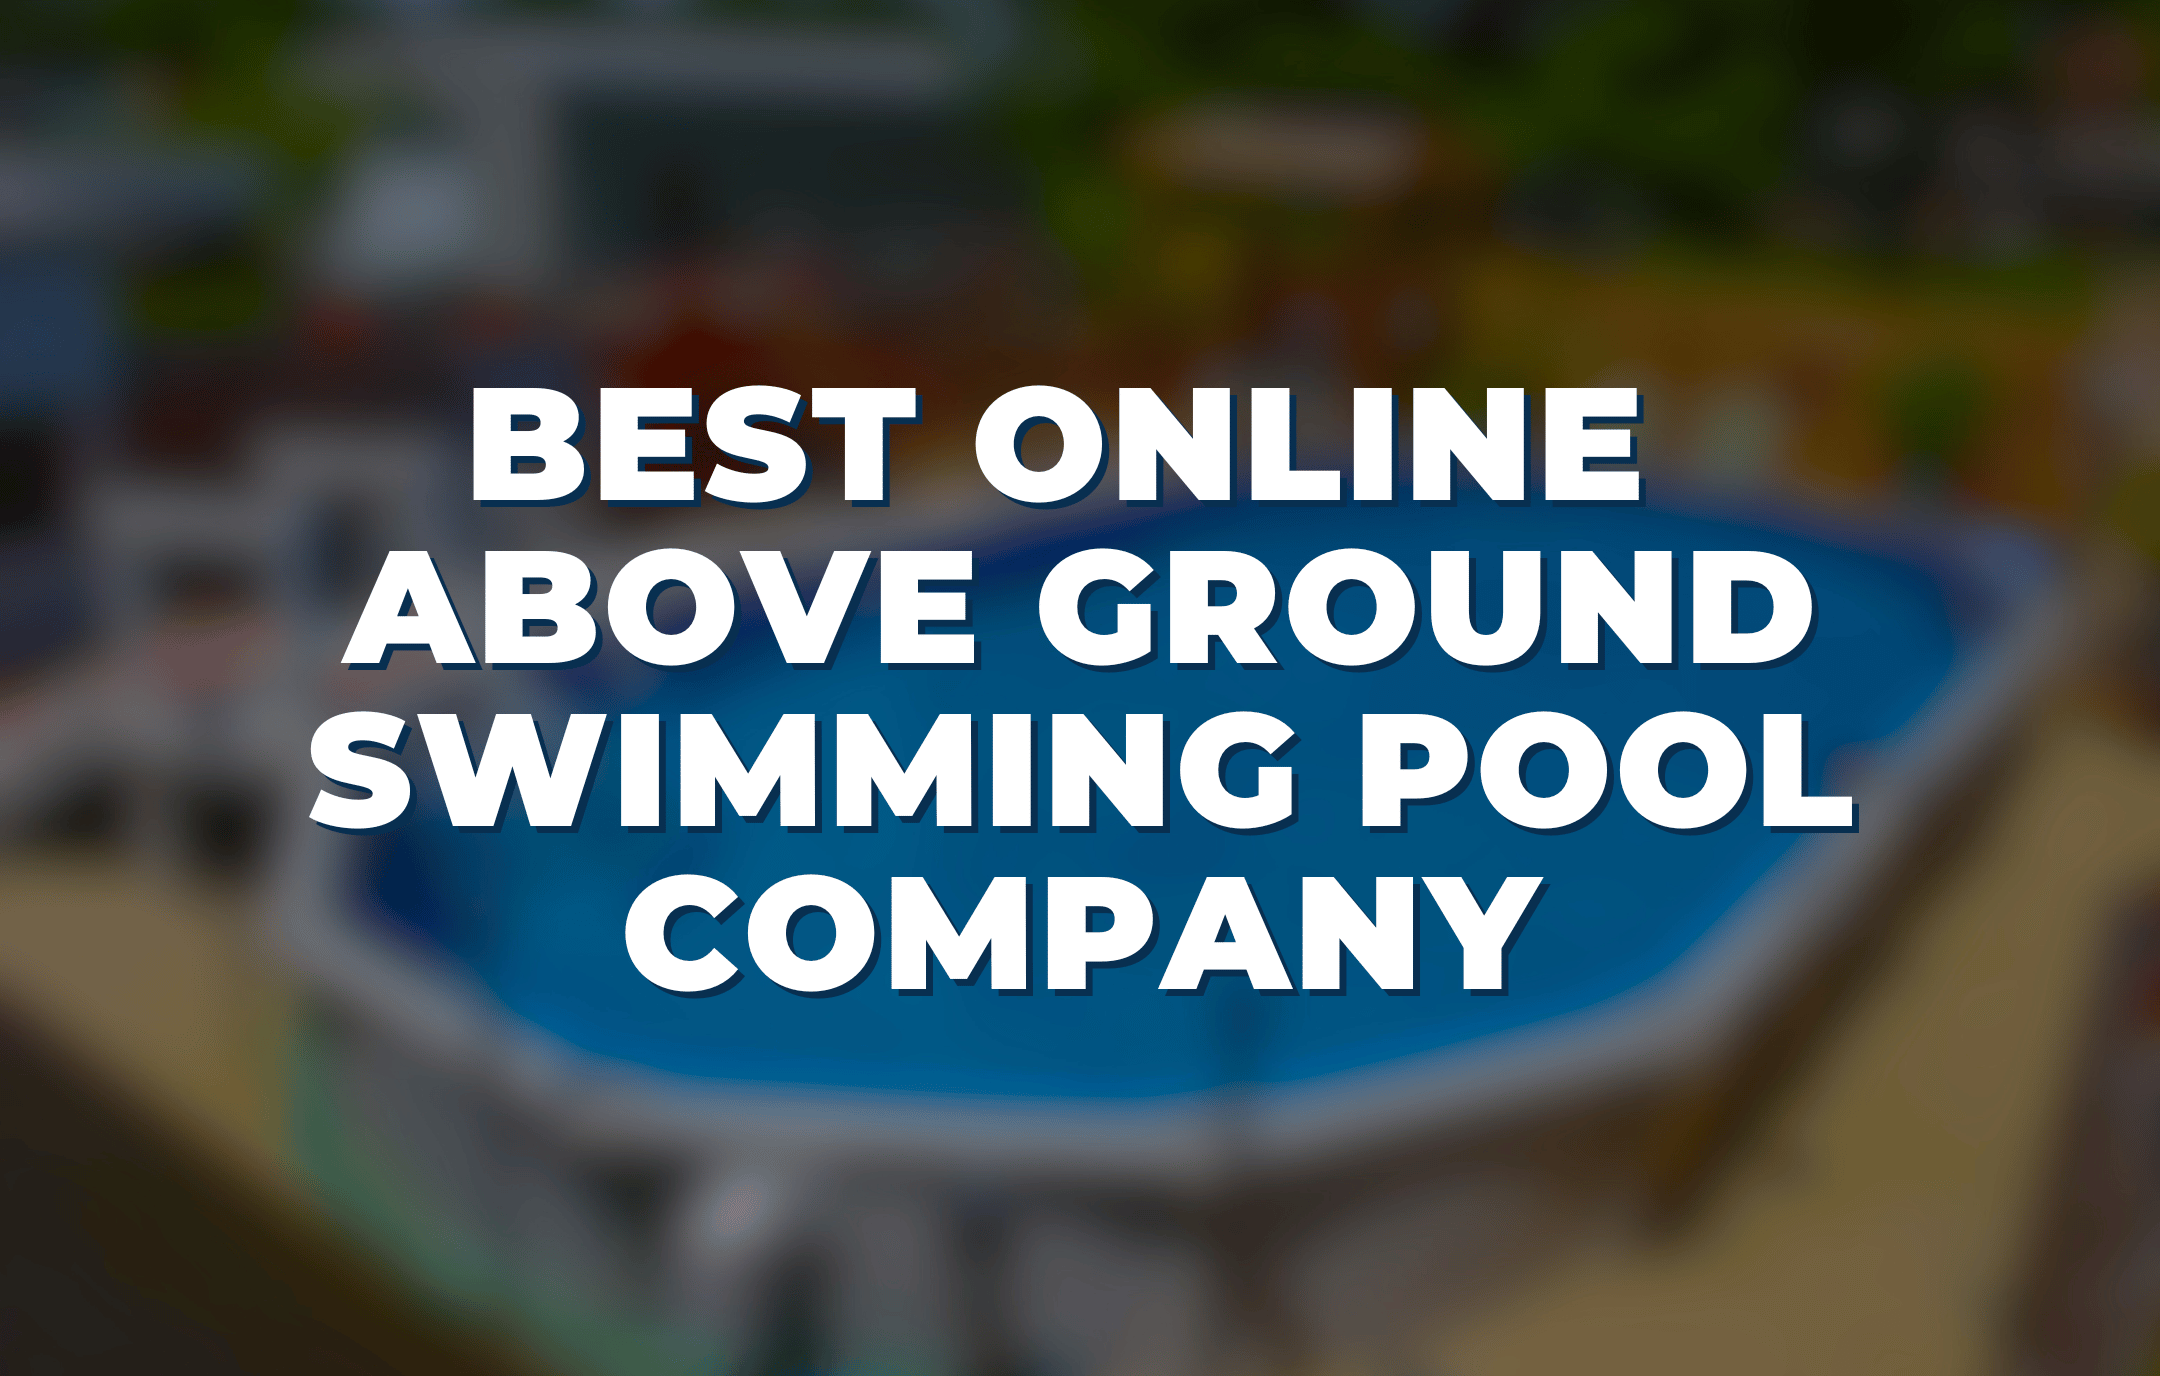 Best Online Above Ground Swimming Pool Company